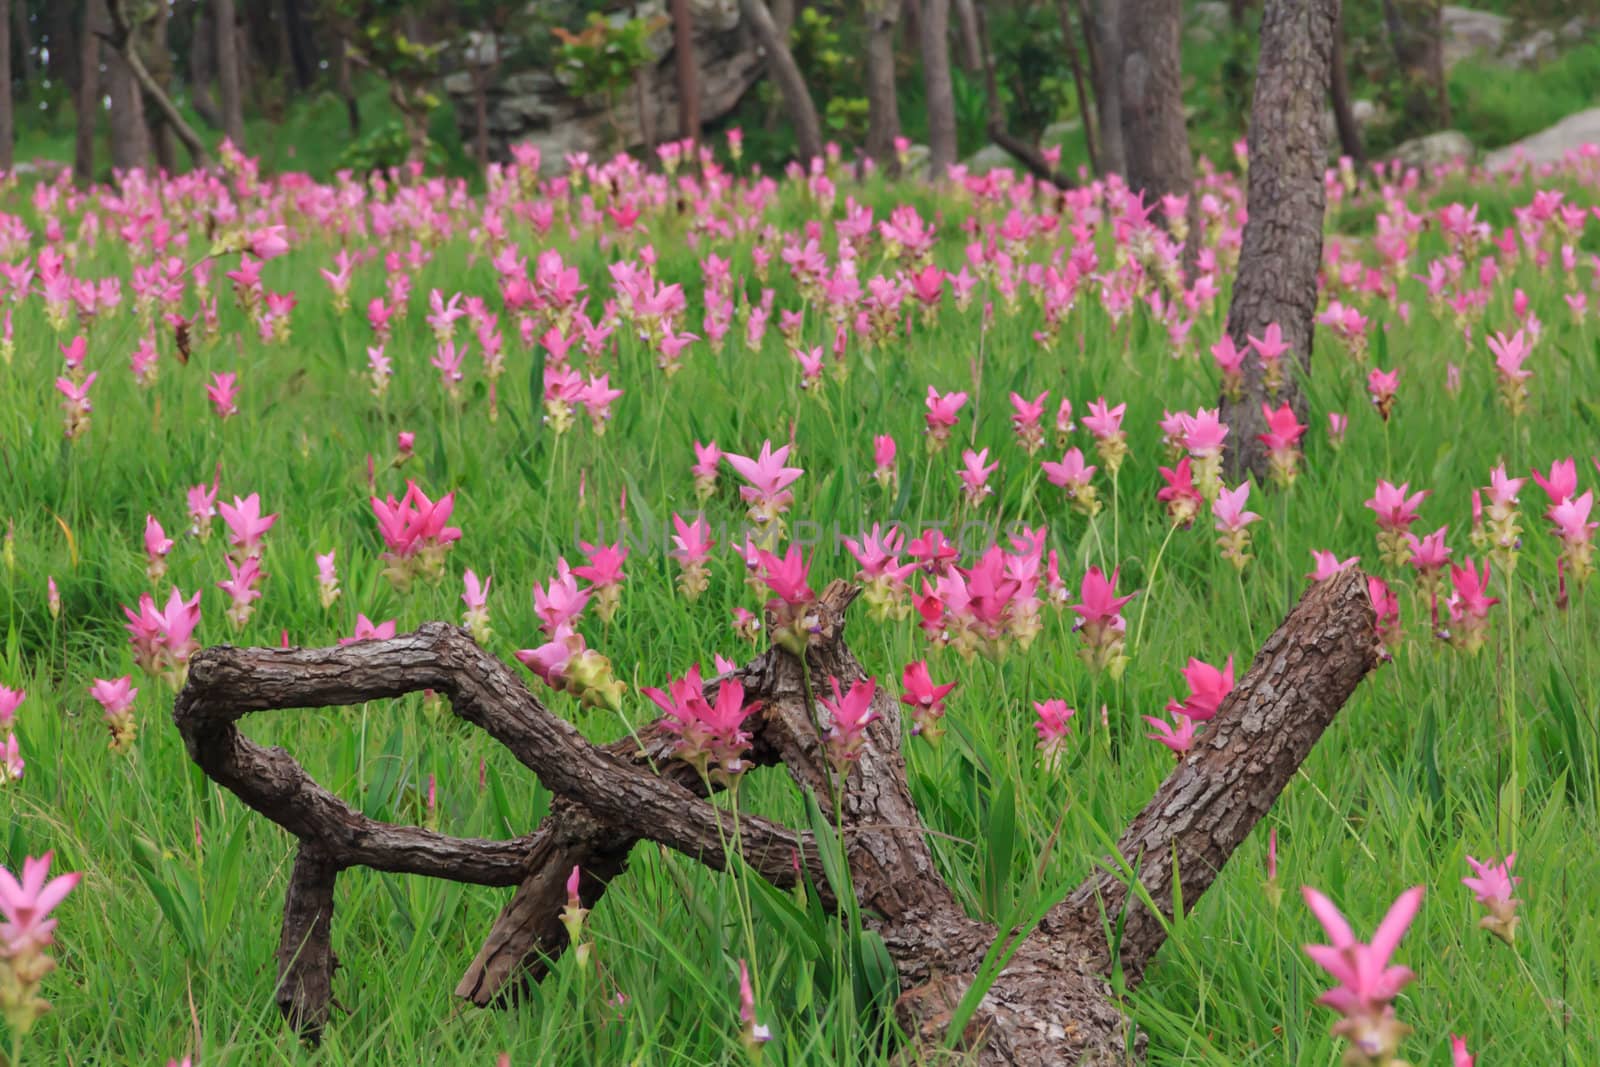 Wild siam tulips blooming in the jungle in Chaiyaphum province, Thailand.